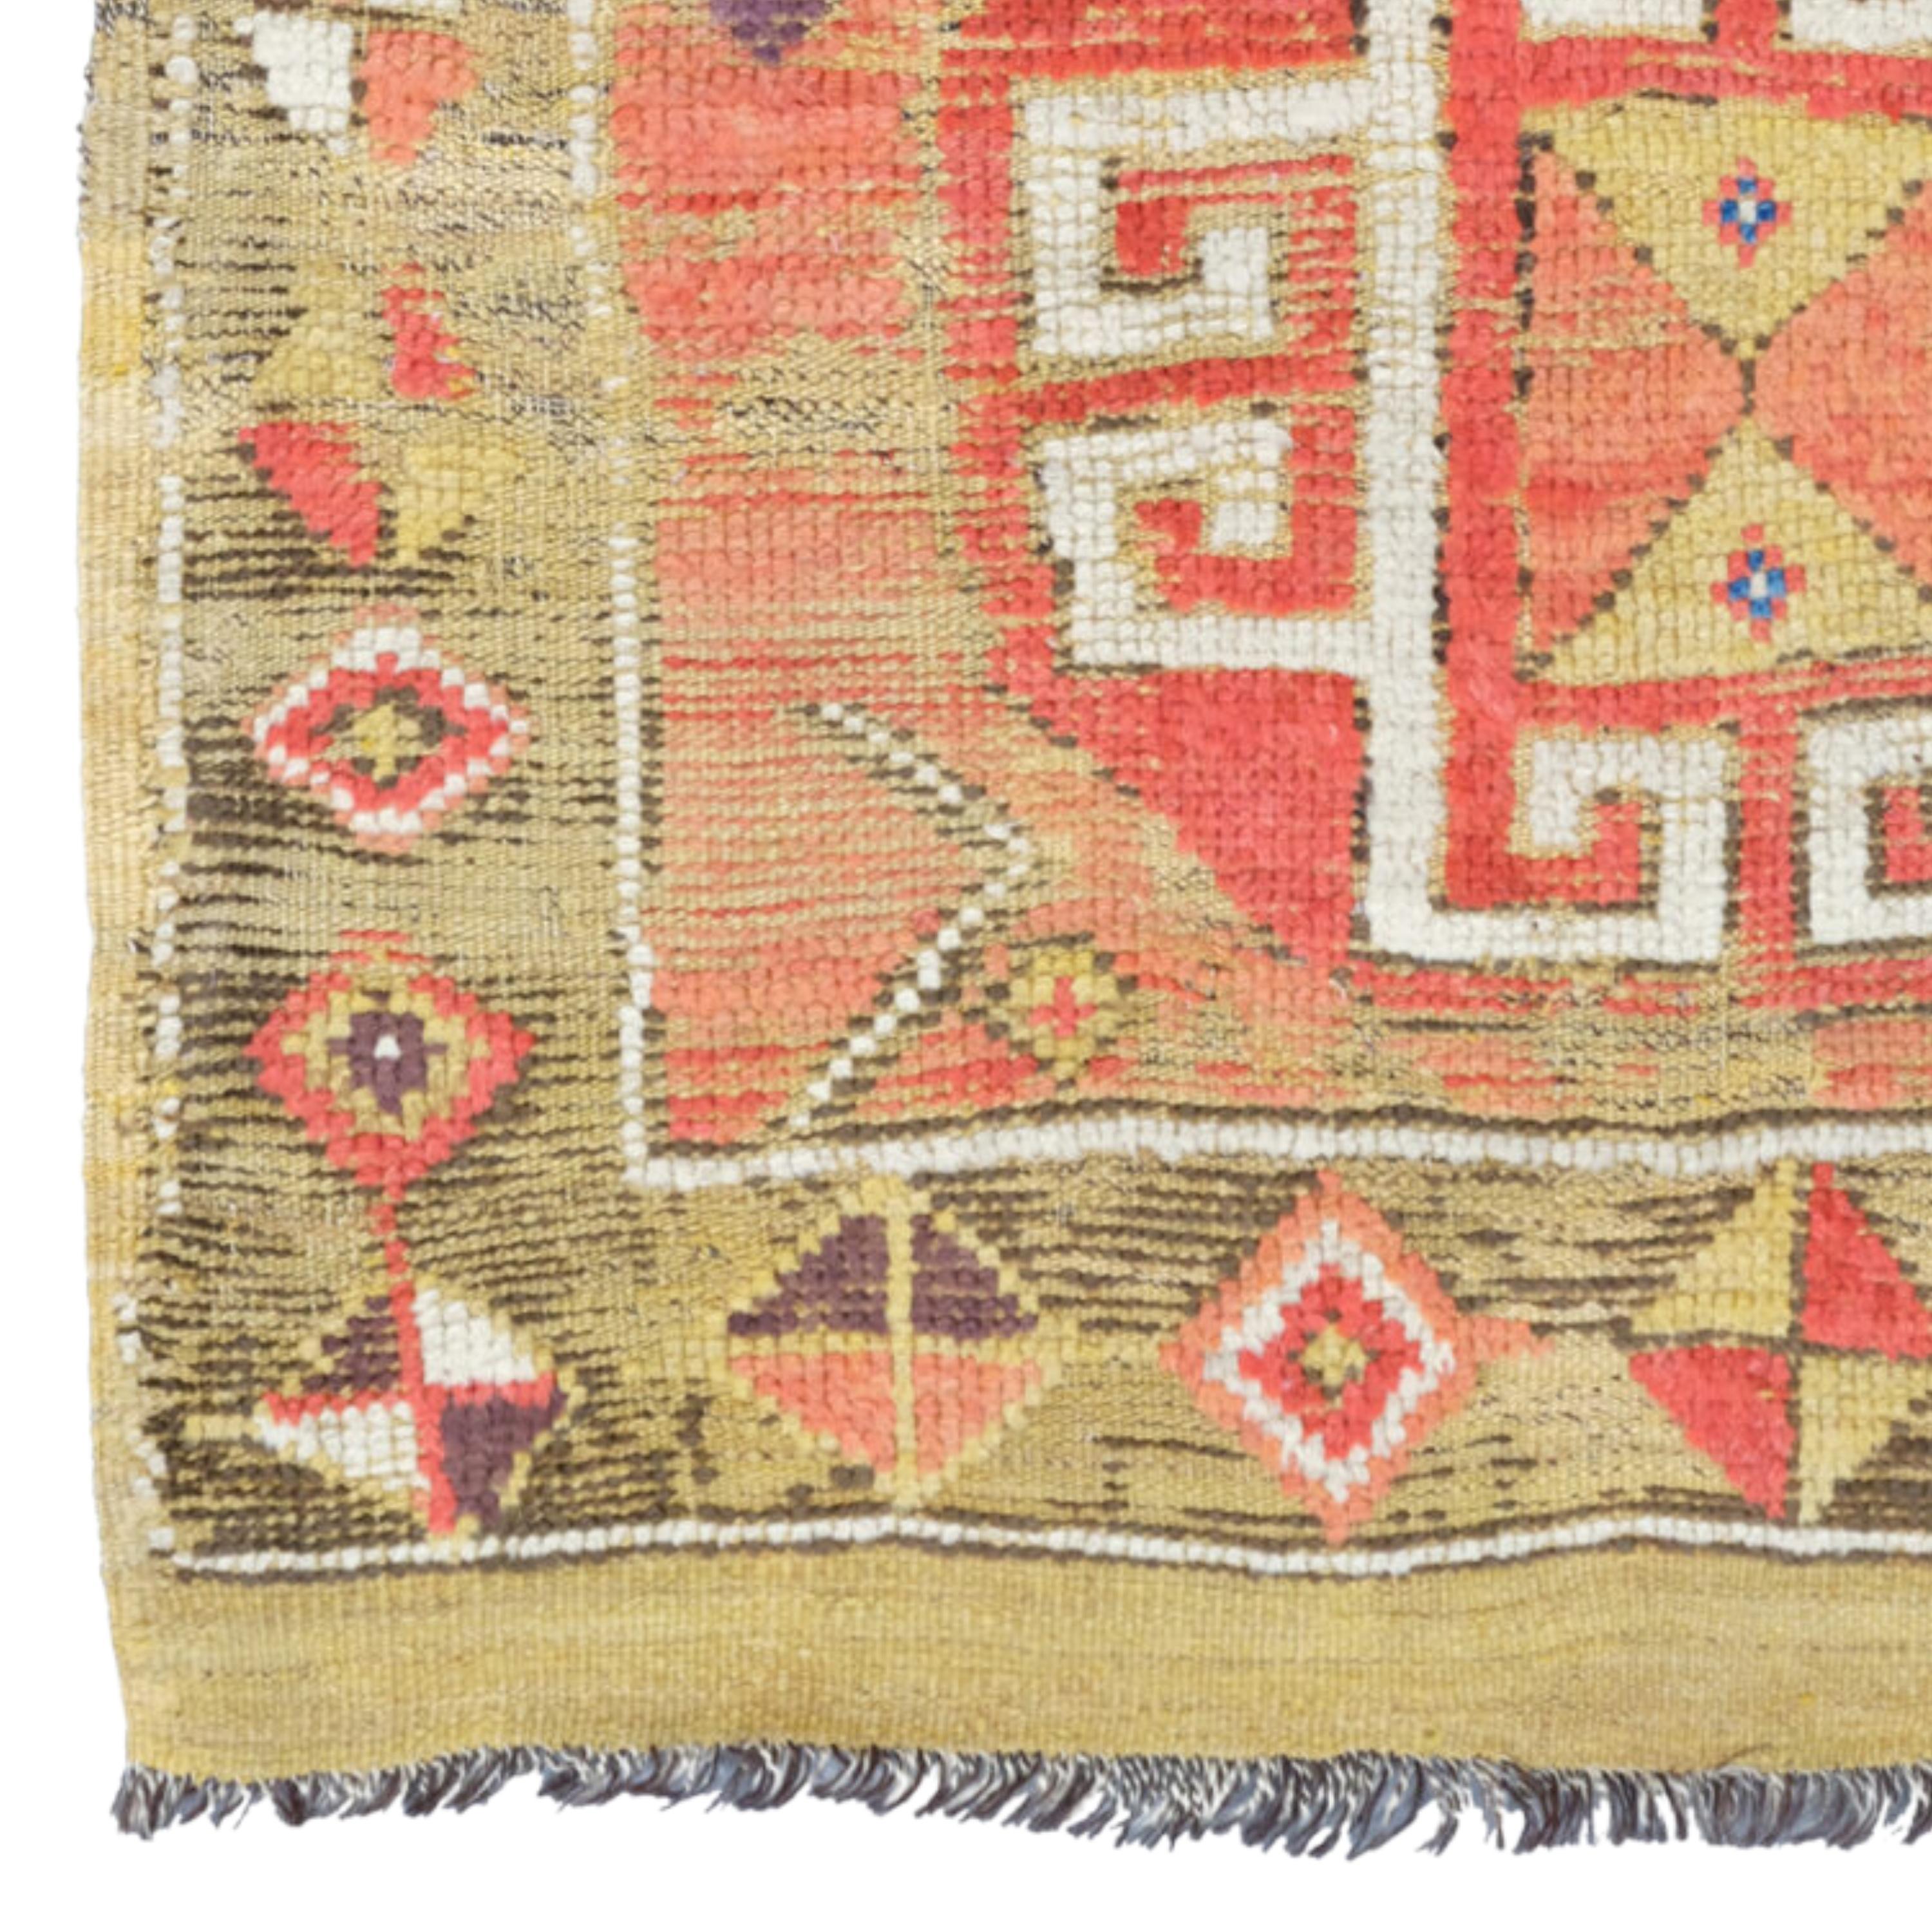 Antique Cappadocia Rug  Anatolian Rugs
18th Century Central Anatolian Cappadocia Rug
Size : 100 x 190 cm (39,3x74,8 In)

Cappadocia rug is one of several village floor coverings that are hand-woven around Cappadocia, Turkey, or brought here from the